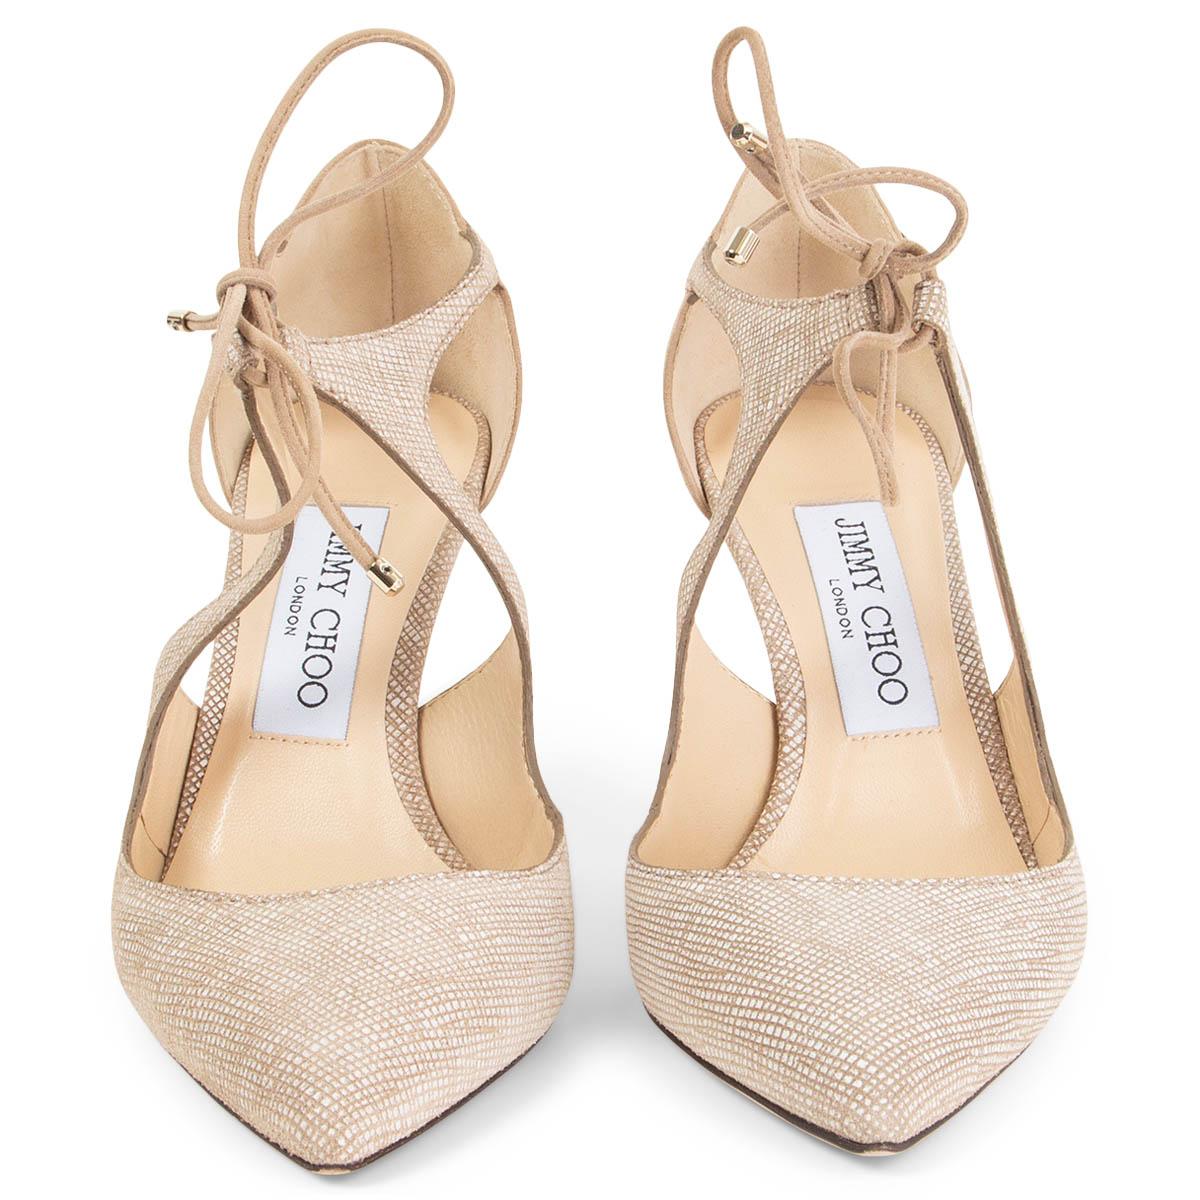 100% authentic Jimmy Choo Vanessa 85 pumps in beige and off-white textured suede with elegant cut-outs and lace-up fastening detail. Have been worn once and are in virtually new condition. 

Measurements
Imprinted Size	36
Shoe Size	36
Inside